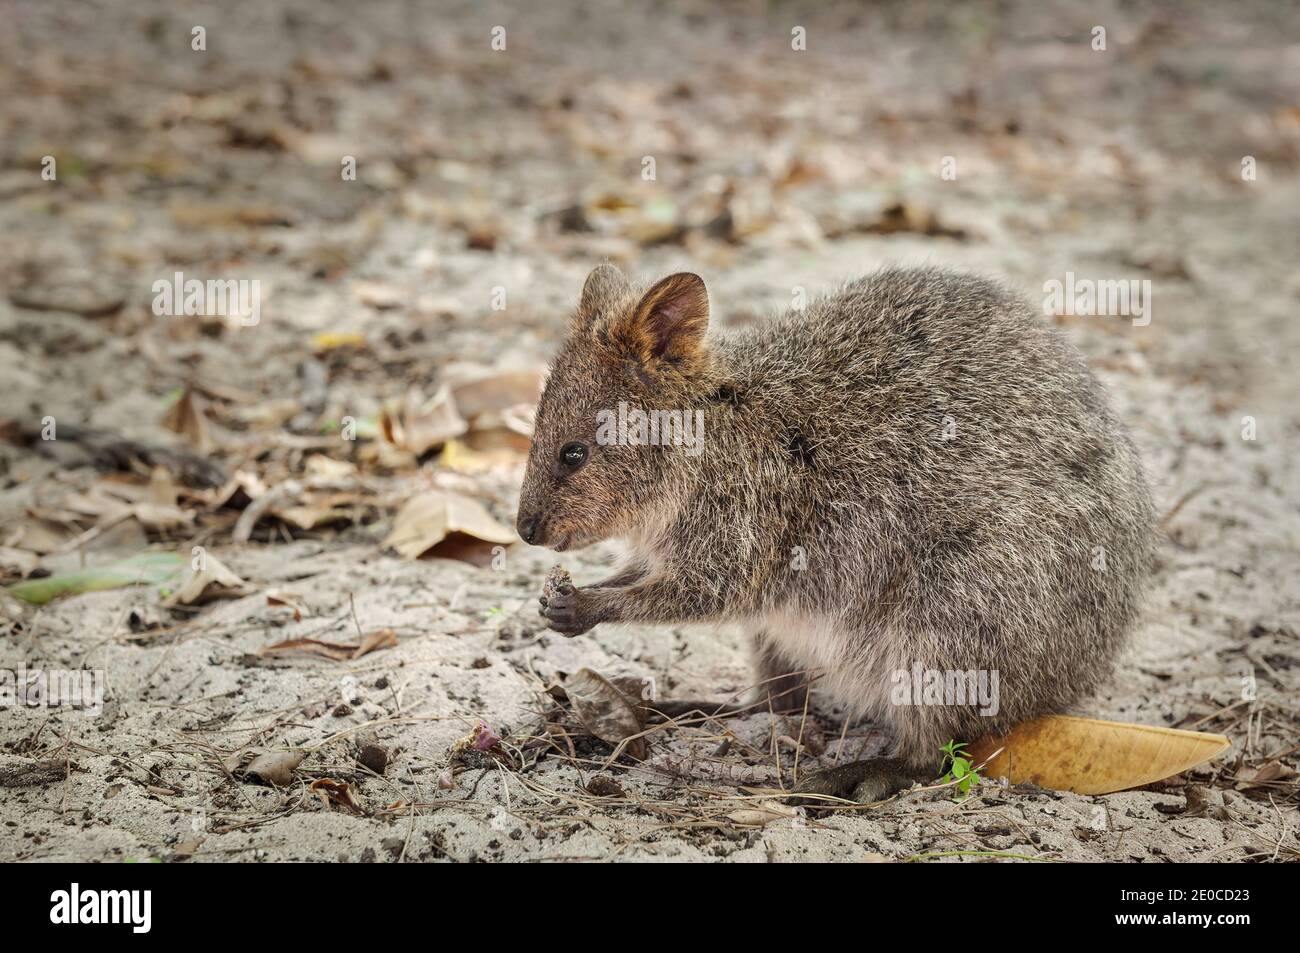 A Quokka is small an endangered species of kangaroo living on Rottnest Island. Stock Photo